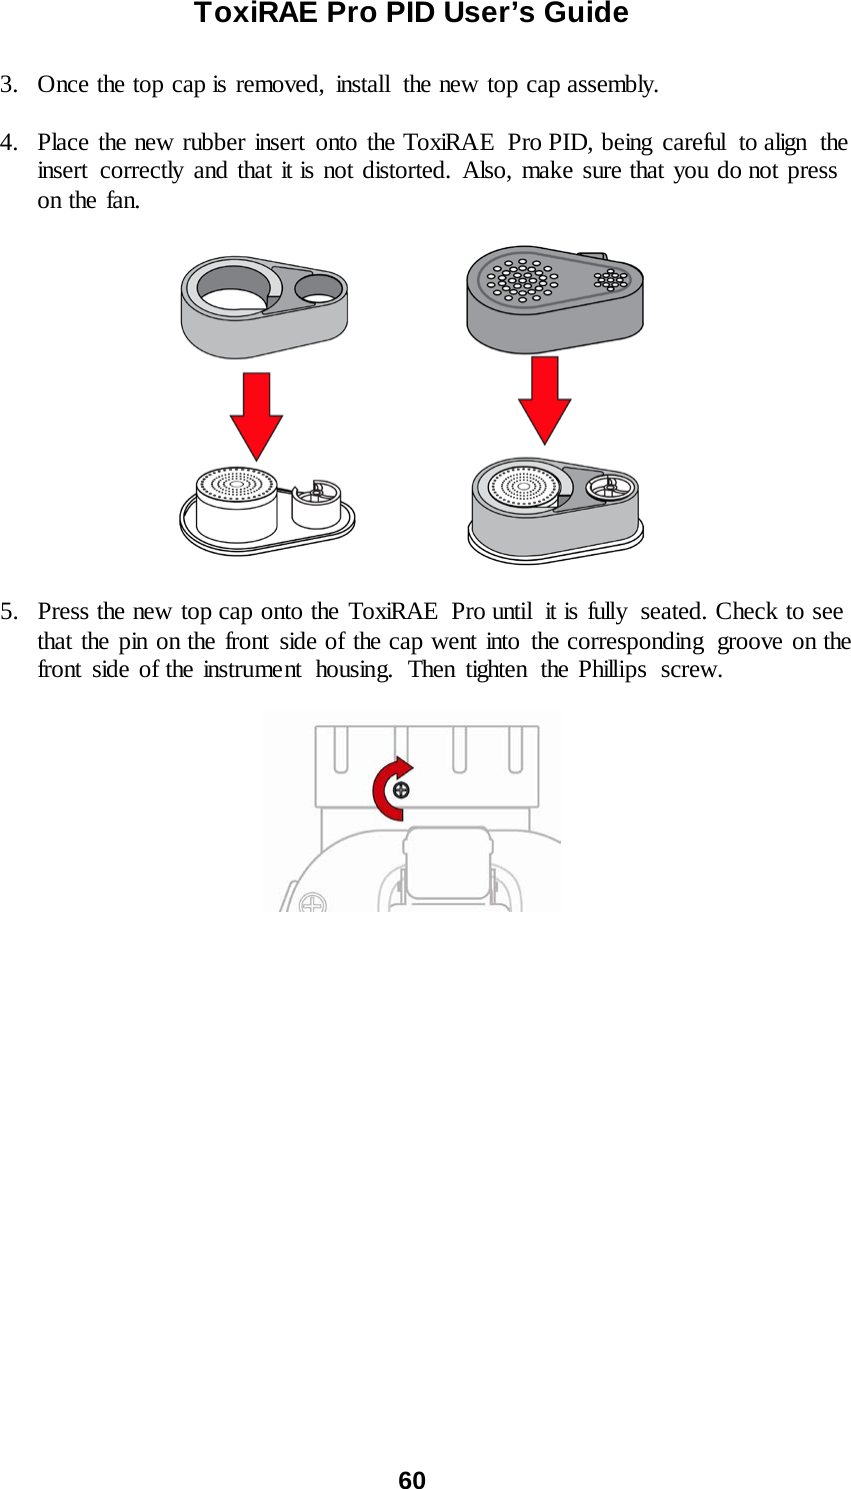 ToxiRAE Pro PID User’s Guide  60   3. Once the top cap is removed,  install  the new top cap assembly.  4. Place the new rubber insert onto the ToxiRAE  Pro PID, being careful  to align the insert correctly and that it is not distorted. Also, make sure that you do not press on the fan.    5. Press the new top cap onto the ToxiRAE Pro until it is fully seated. Check to see that the pin on the front side of the cap went into the corresponding  groove on the front side of the instrument  housing.  Then tighten the Phillips screw.     